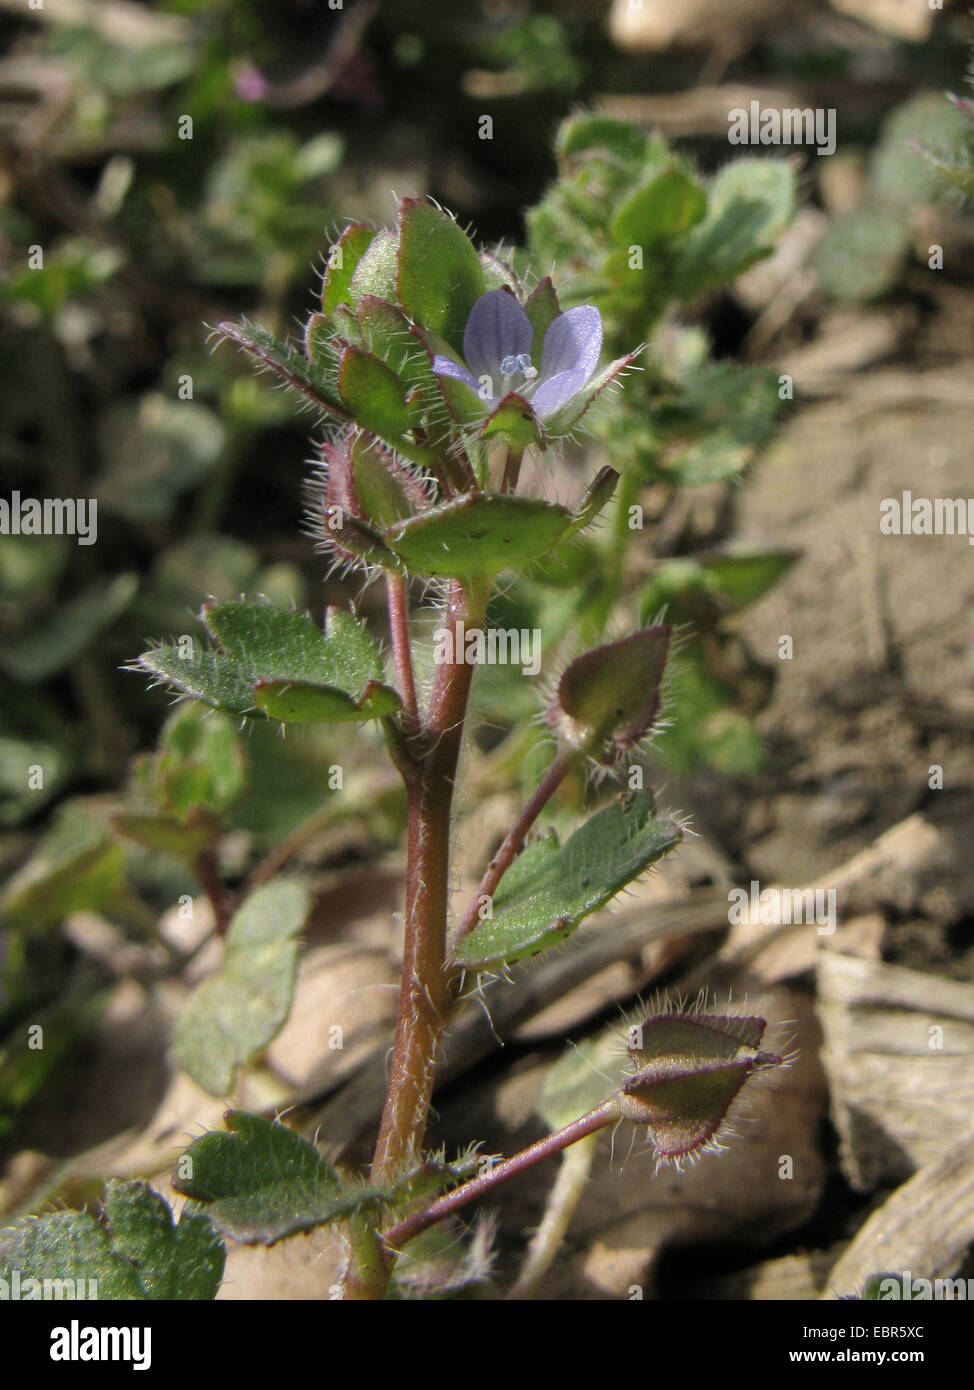 ivy-leaf speedwell (Veronica hederifolia), blooming, Germany, Lower Saxony Stock Photo